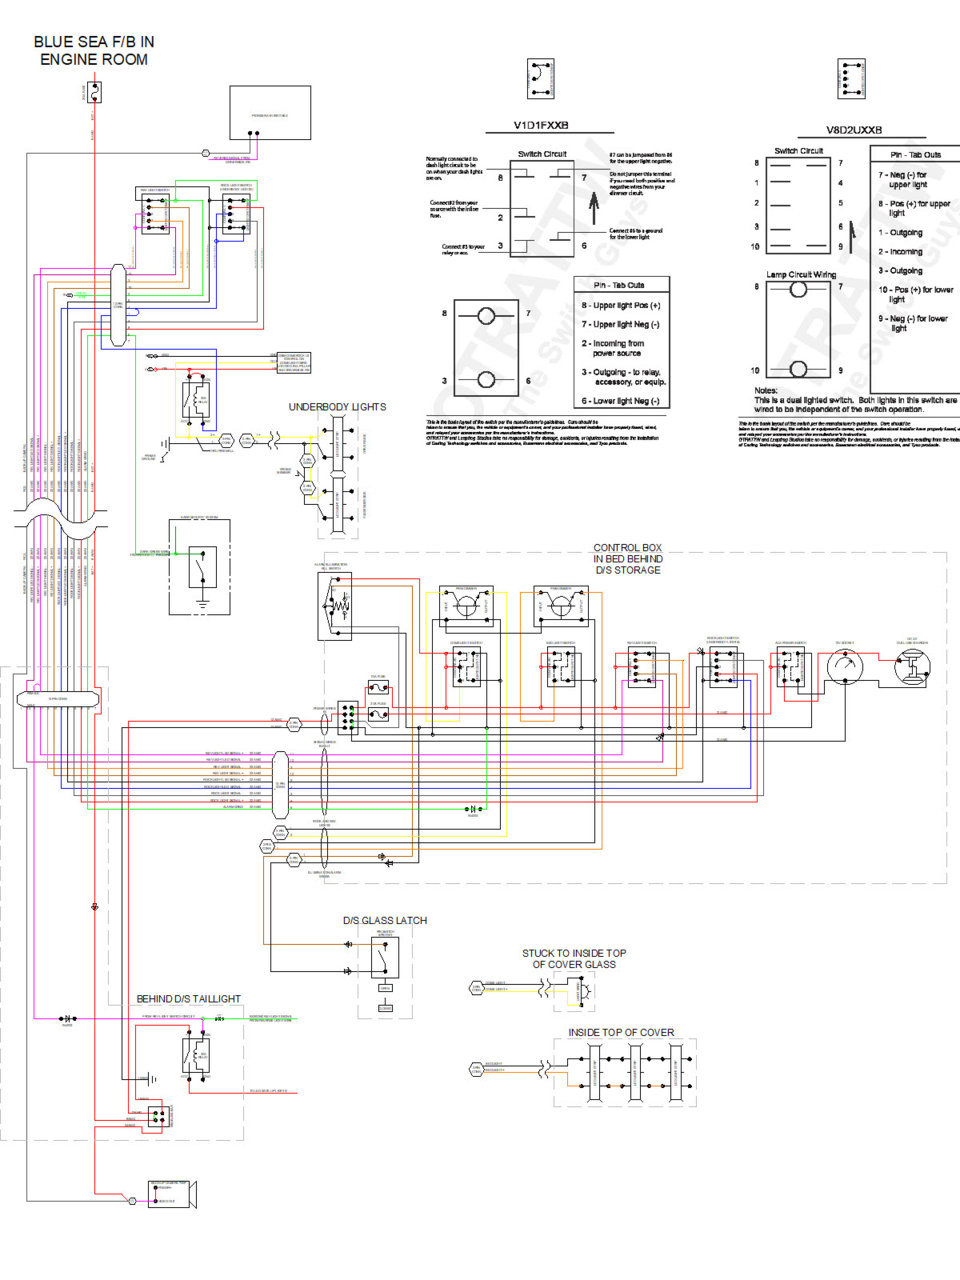 Help with Wiring Diagram for Noob | Tacoma World